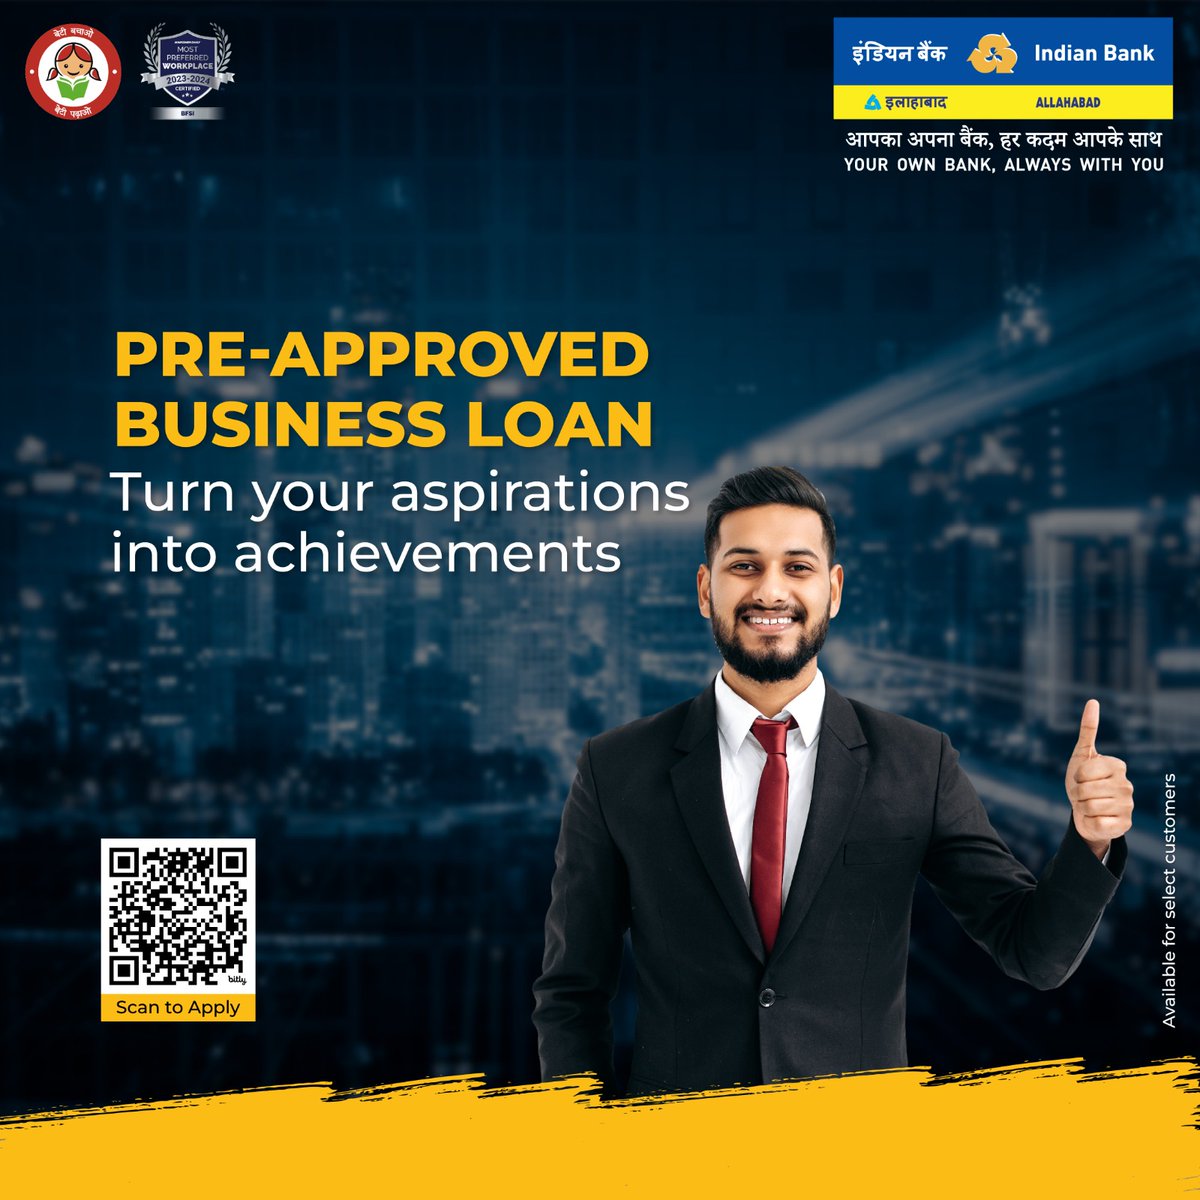 Take your dream venture to new heights of success. Accelerate your growth journey with our Pre-approved Business Loan. T&C Apply
Apply now : bit.ly/IB_PABL
#IndianBank 
@DFS_India